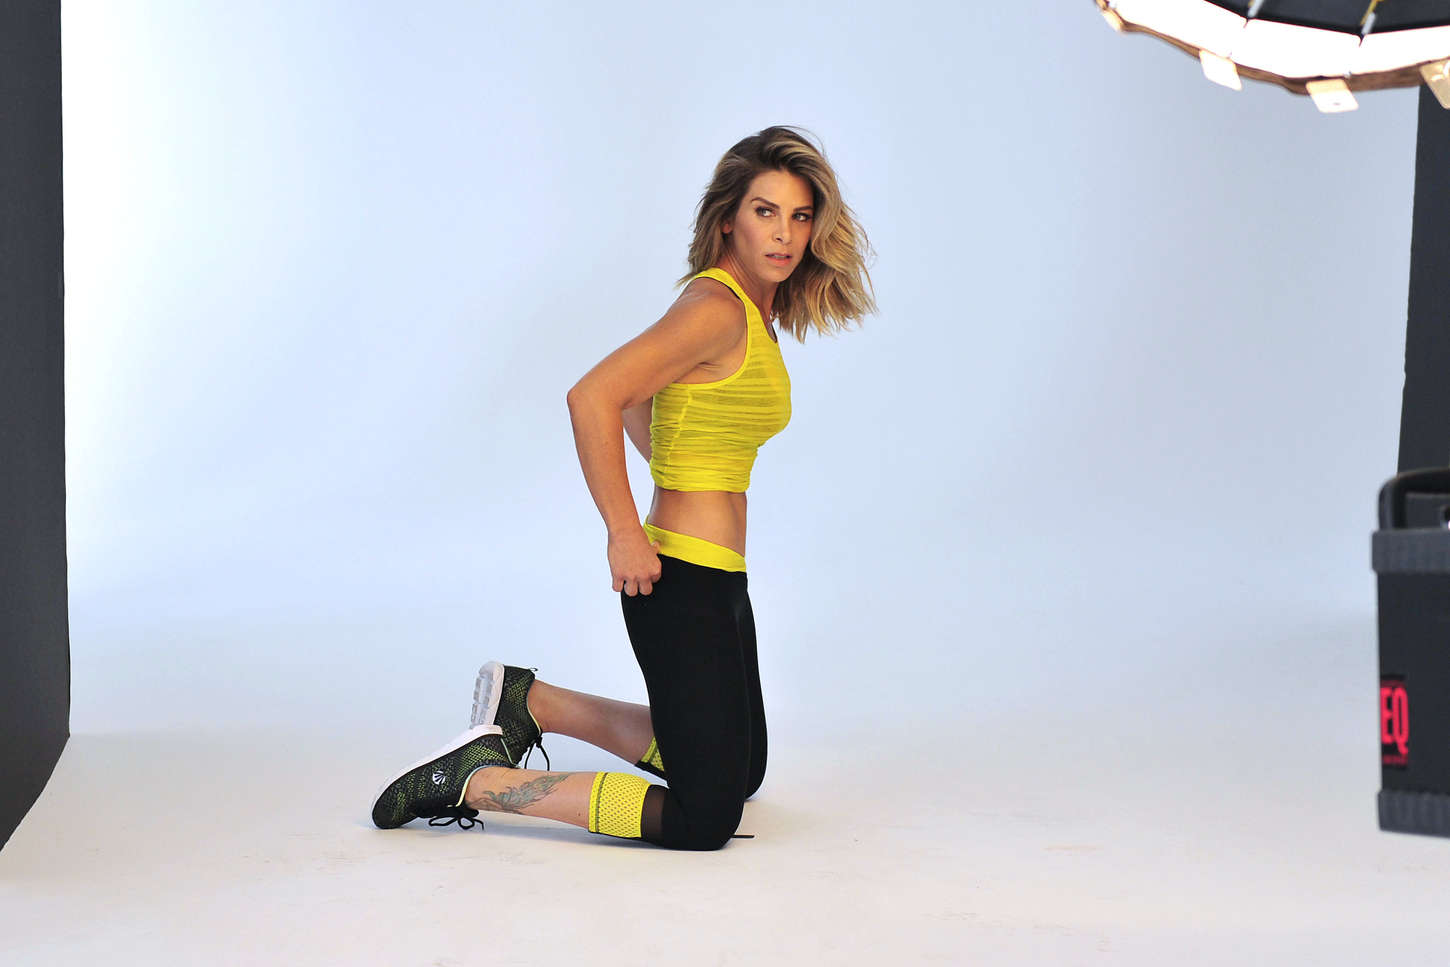 Jillian Michaels Impact Collection For Kmart Fall Campaign Shoot in Los Angeles-1